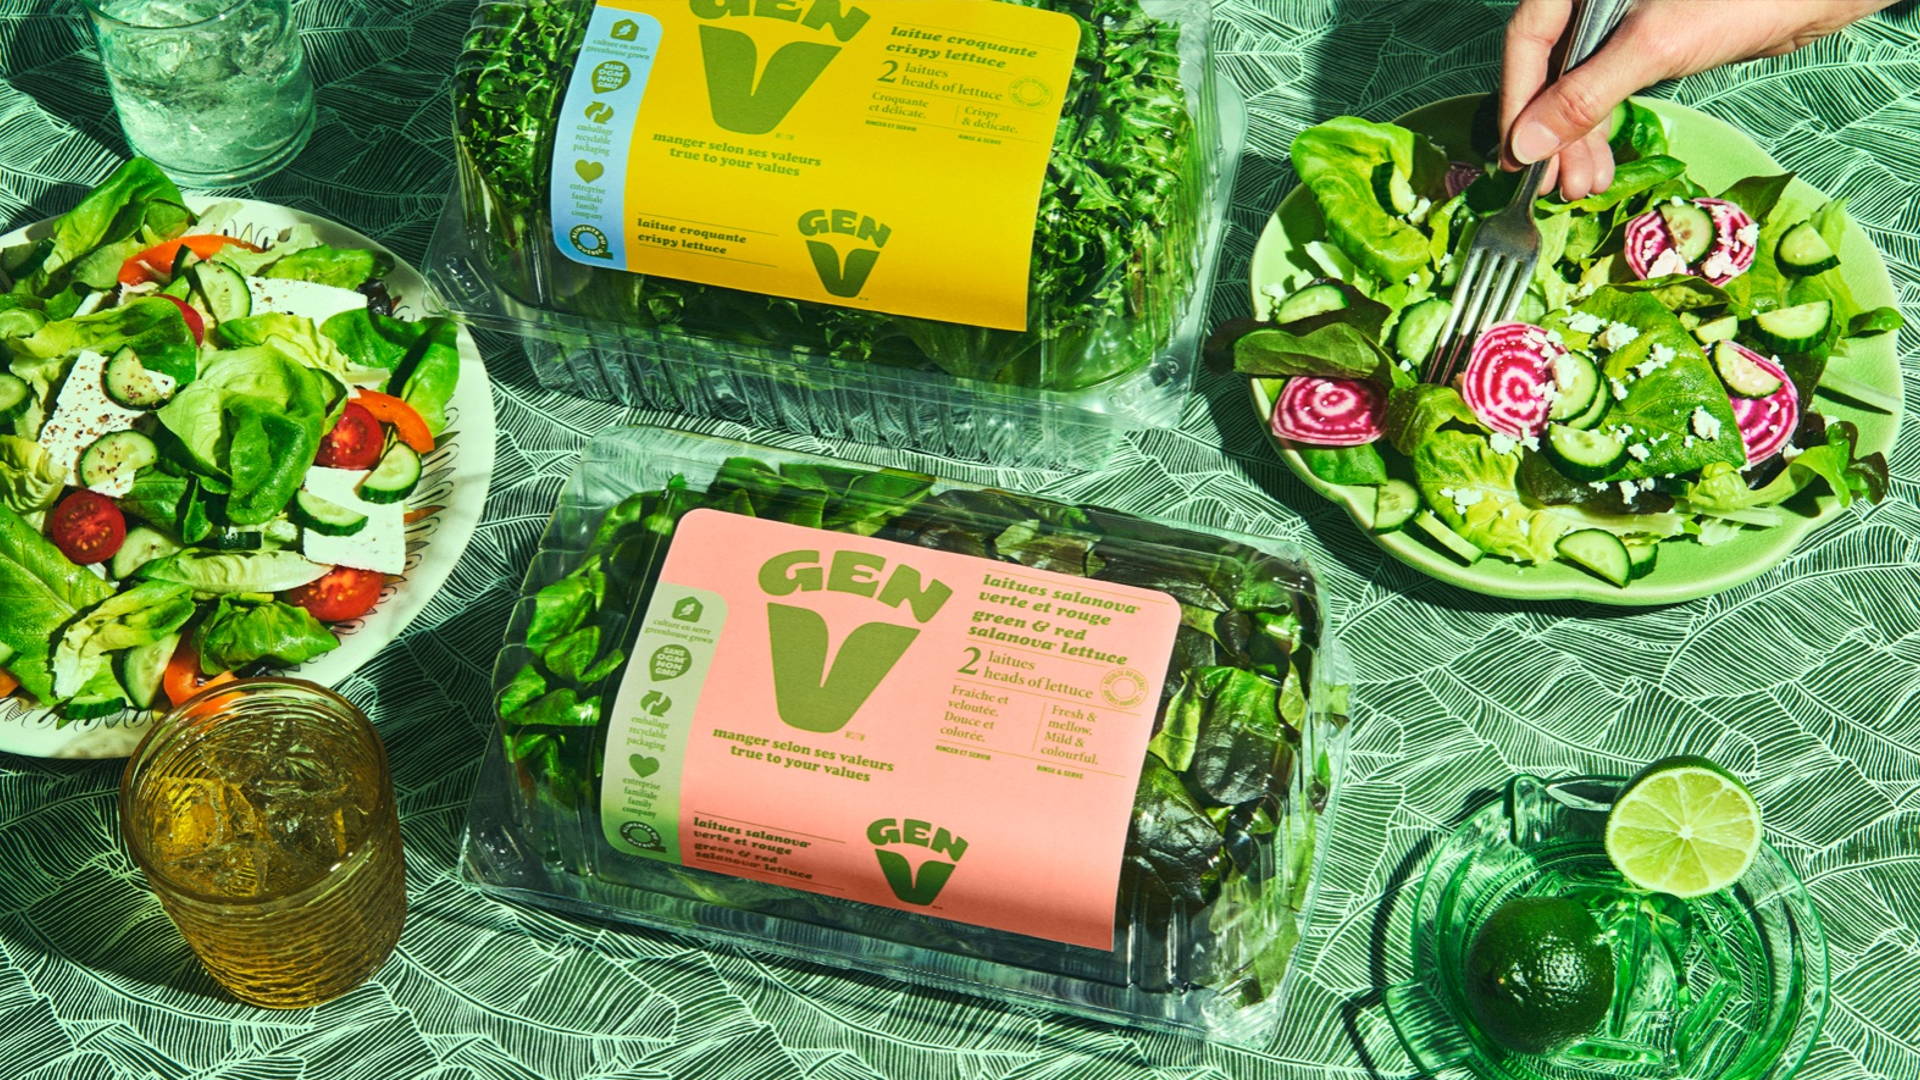 Featured image for Gen V Packaging Makes Eating Veggies Look Like Fun